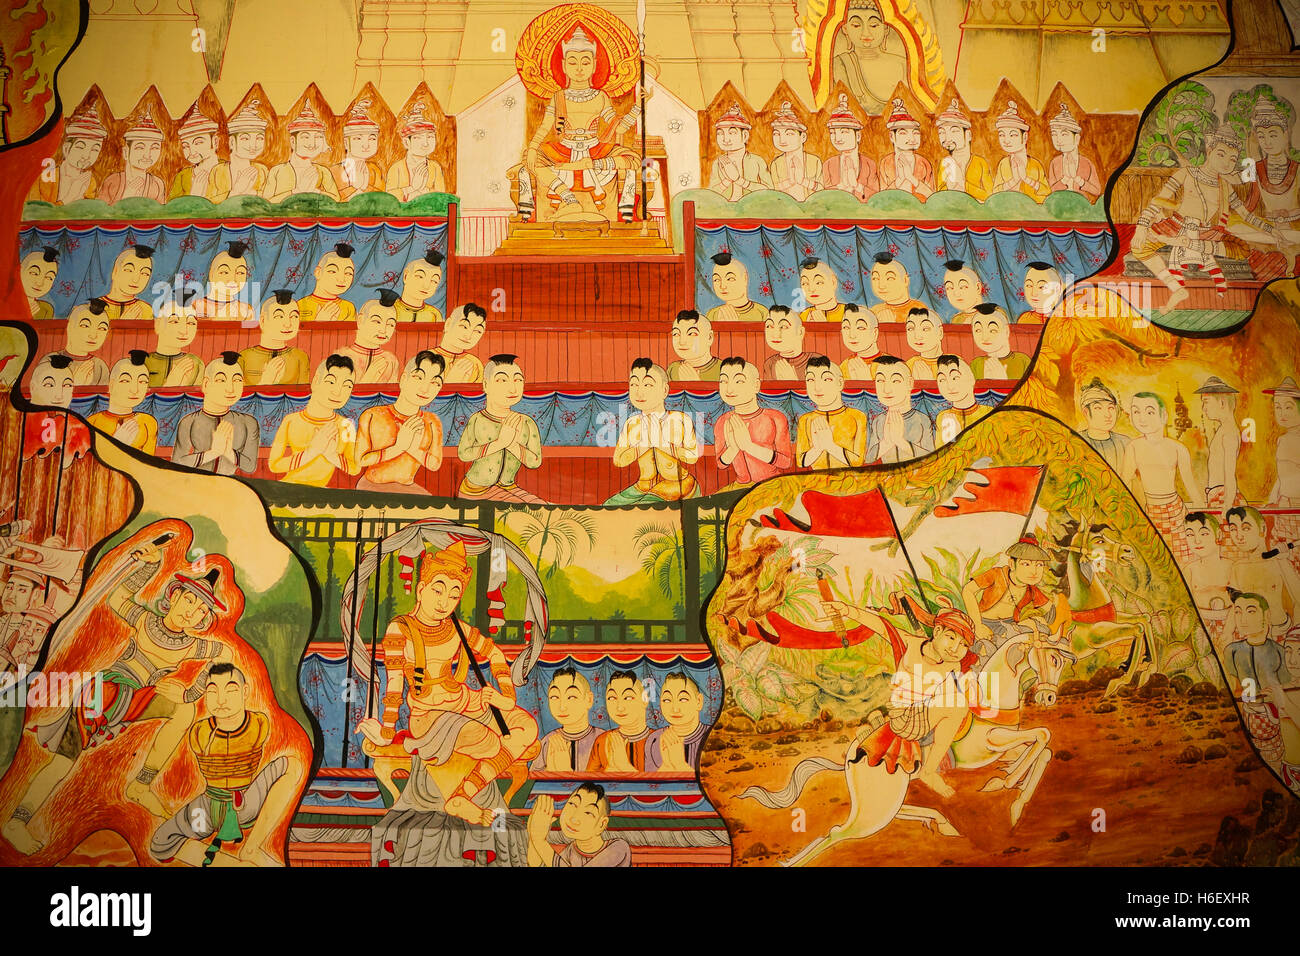 Traditional Thai style art painting on temple's wall (Ramayana story) Stock Photo